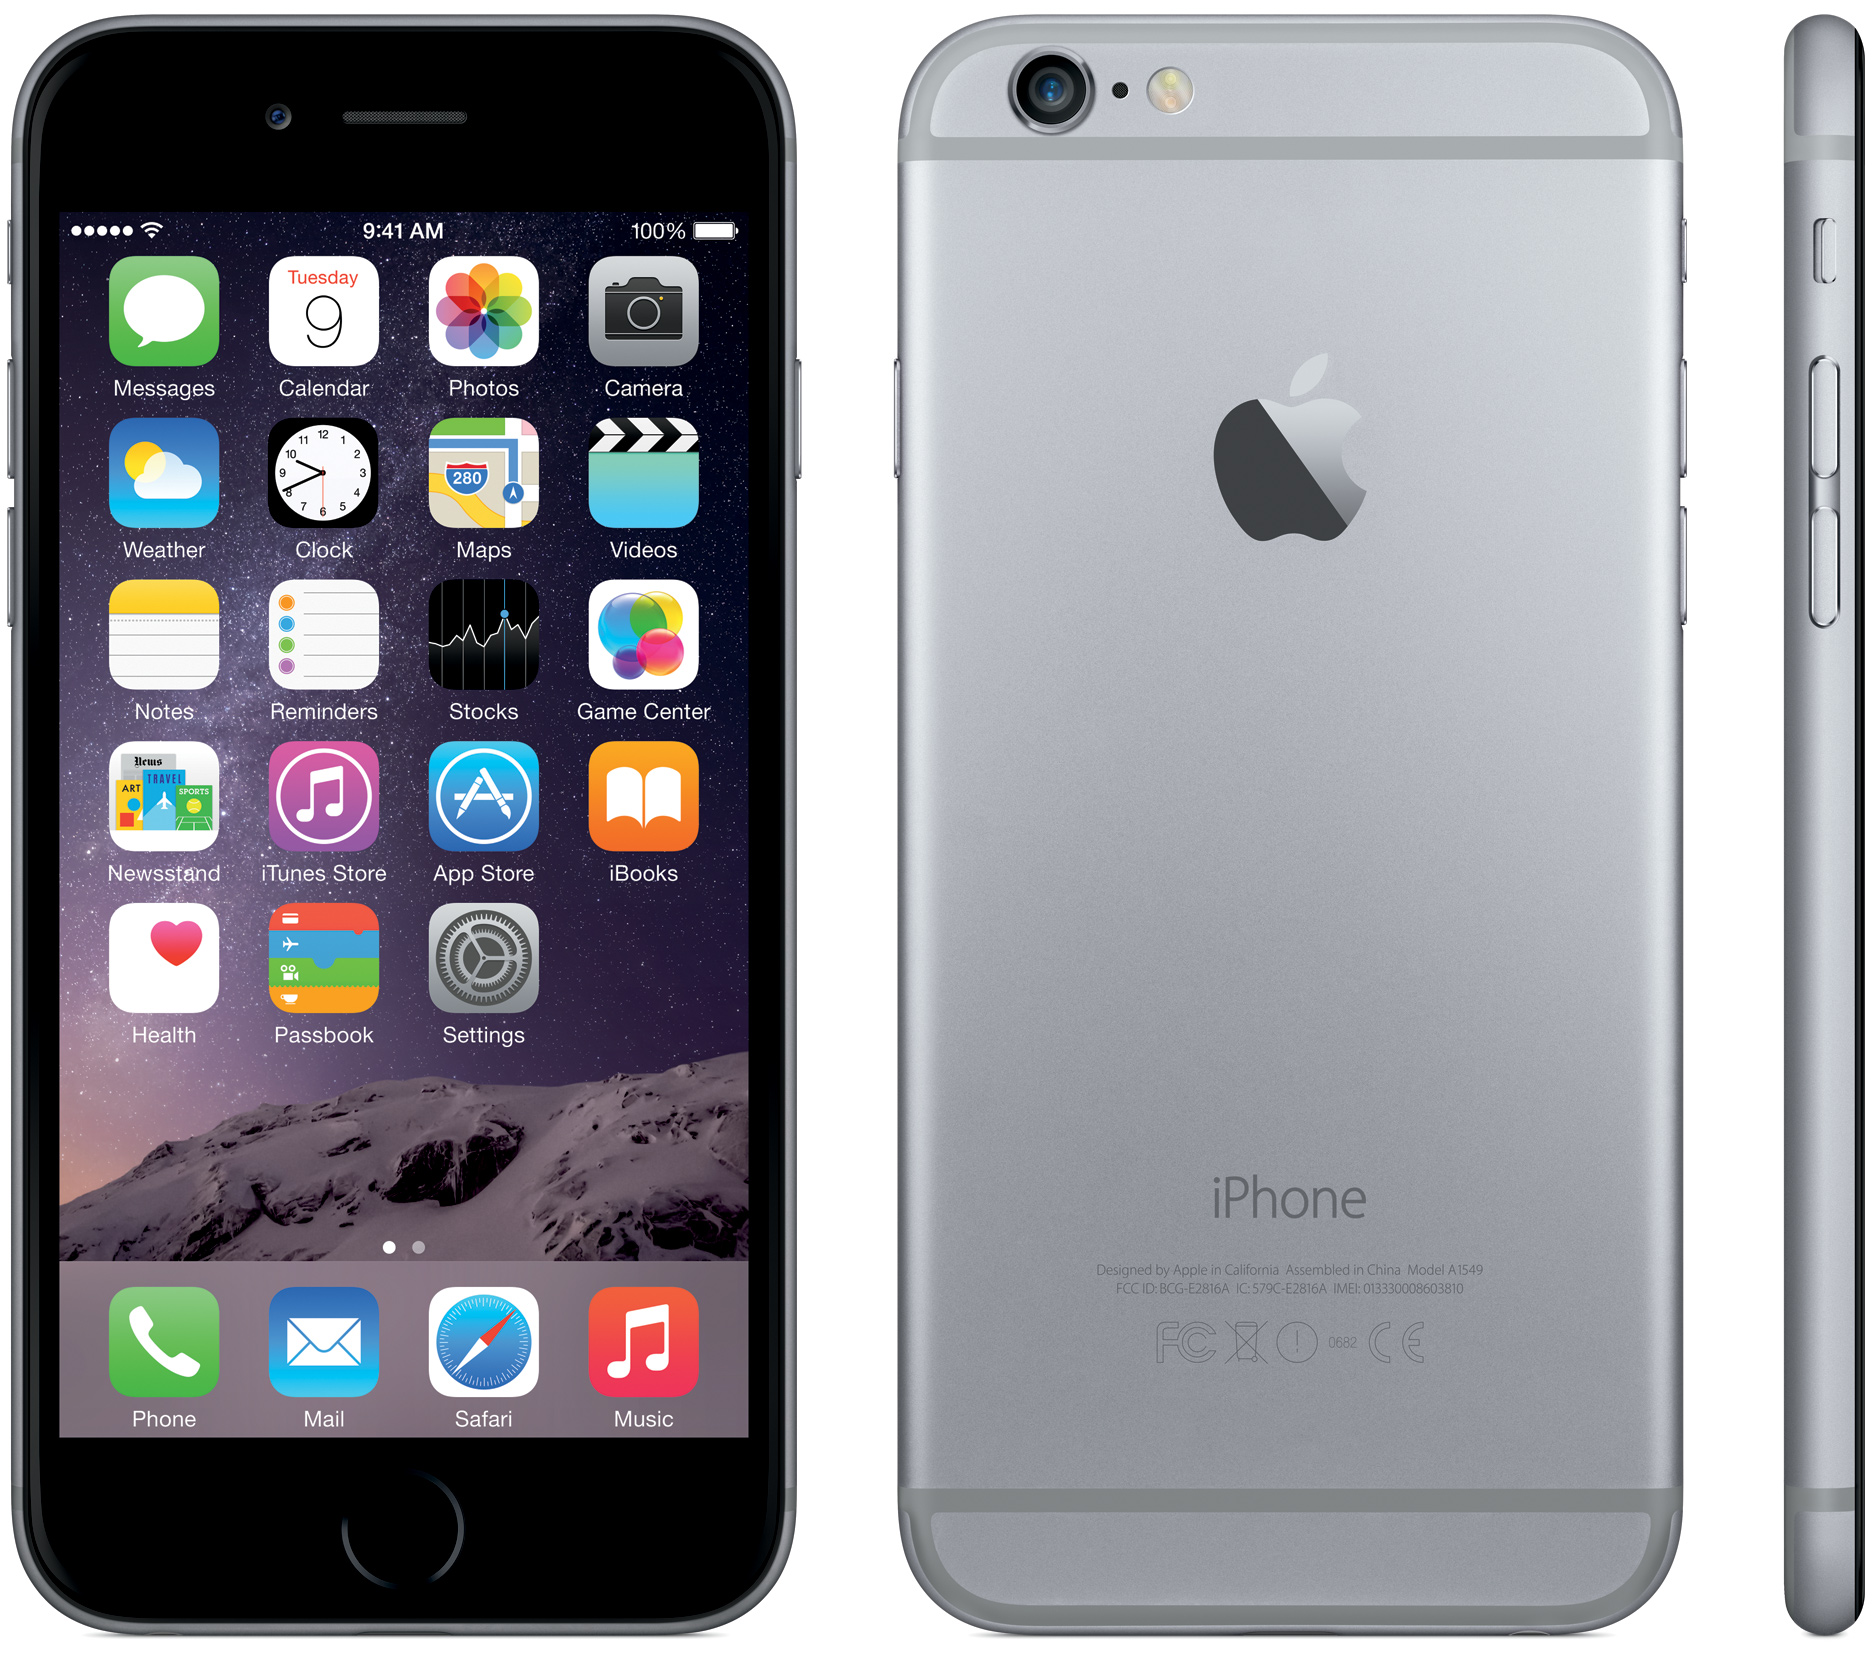 Apple introduces iPhone 6, iPhone 6 Plus smartphones , 2.5 out of 5 